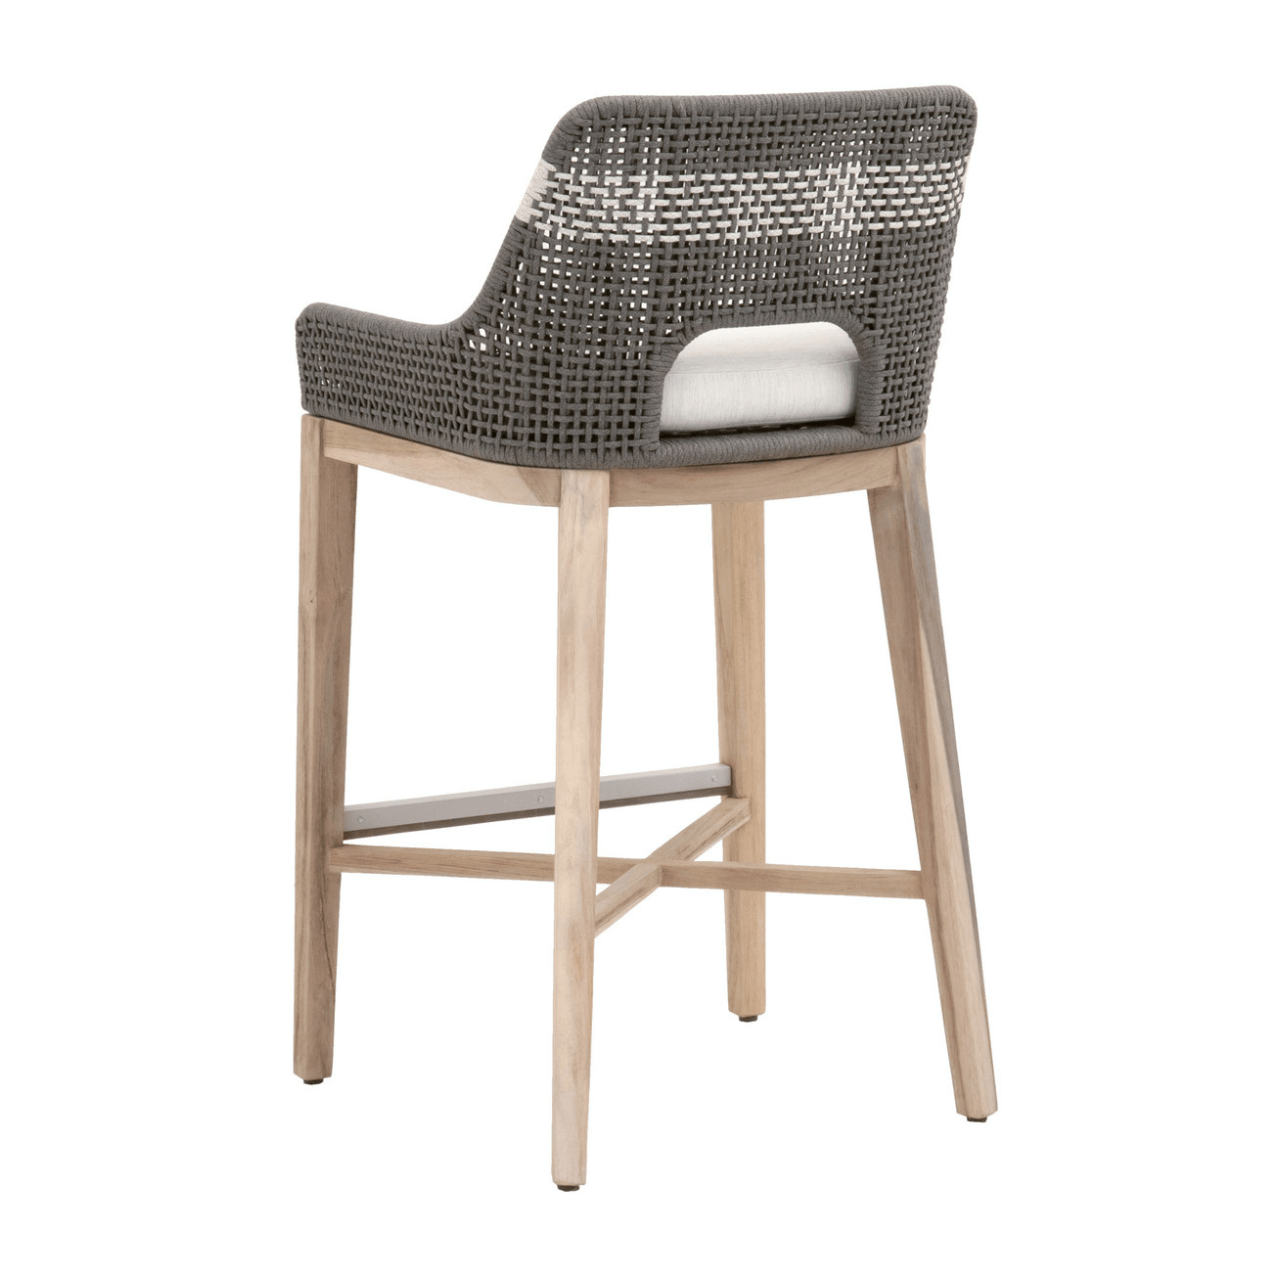 Woven Tapestry Outdoor Bar Stools